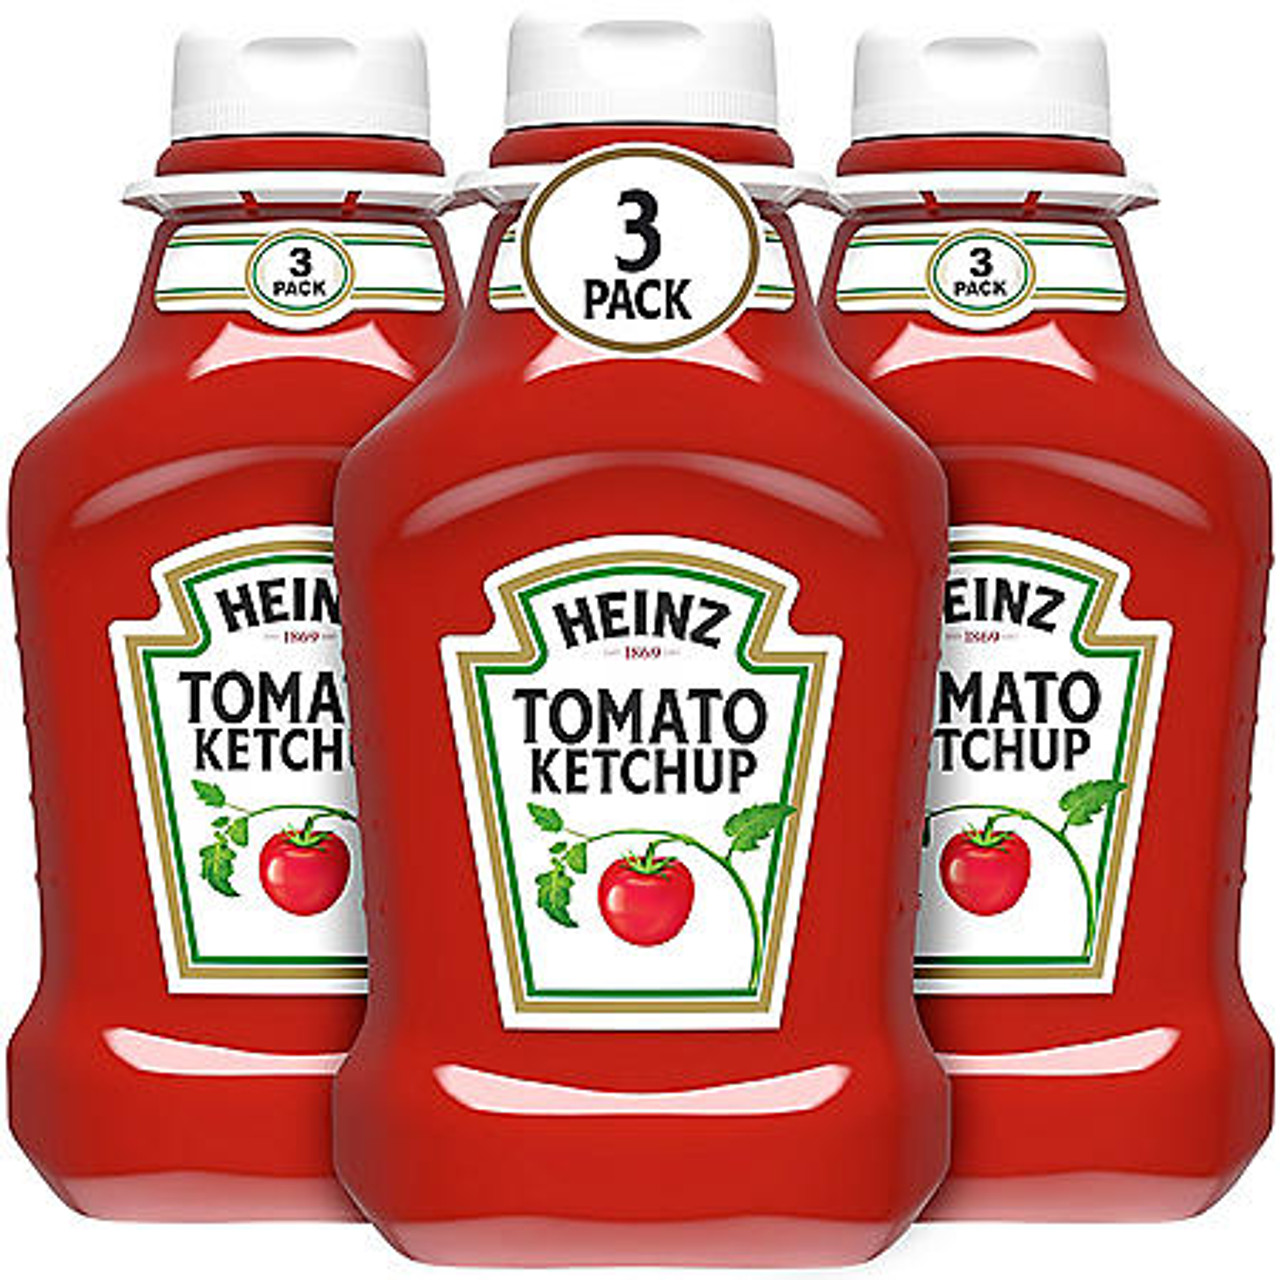 Heinz Tomato Ketchup (44 oz., 3 pk.) - [From 56.00 - Choose pk Qty ] - *Ships from Miami